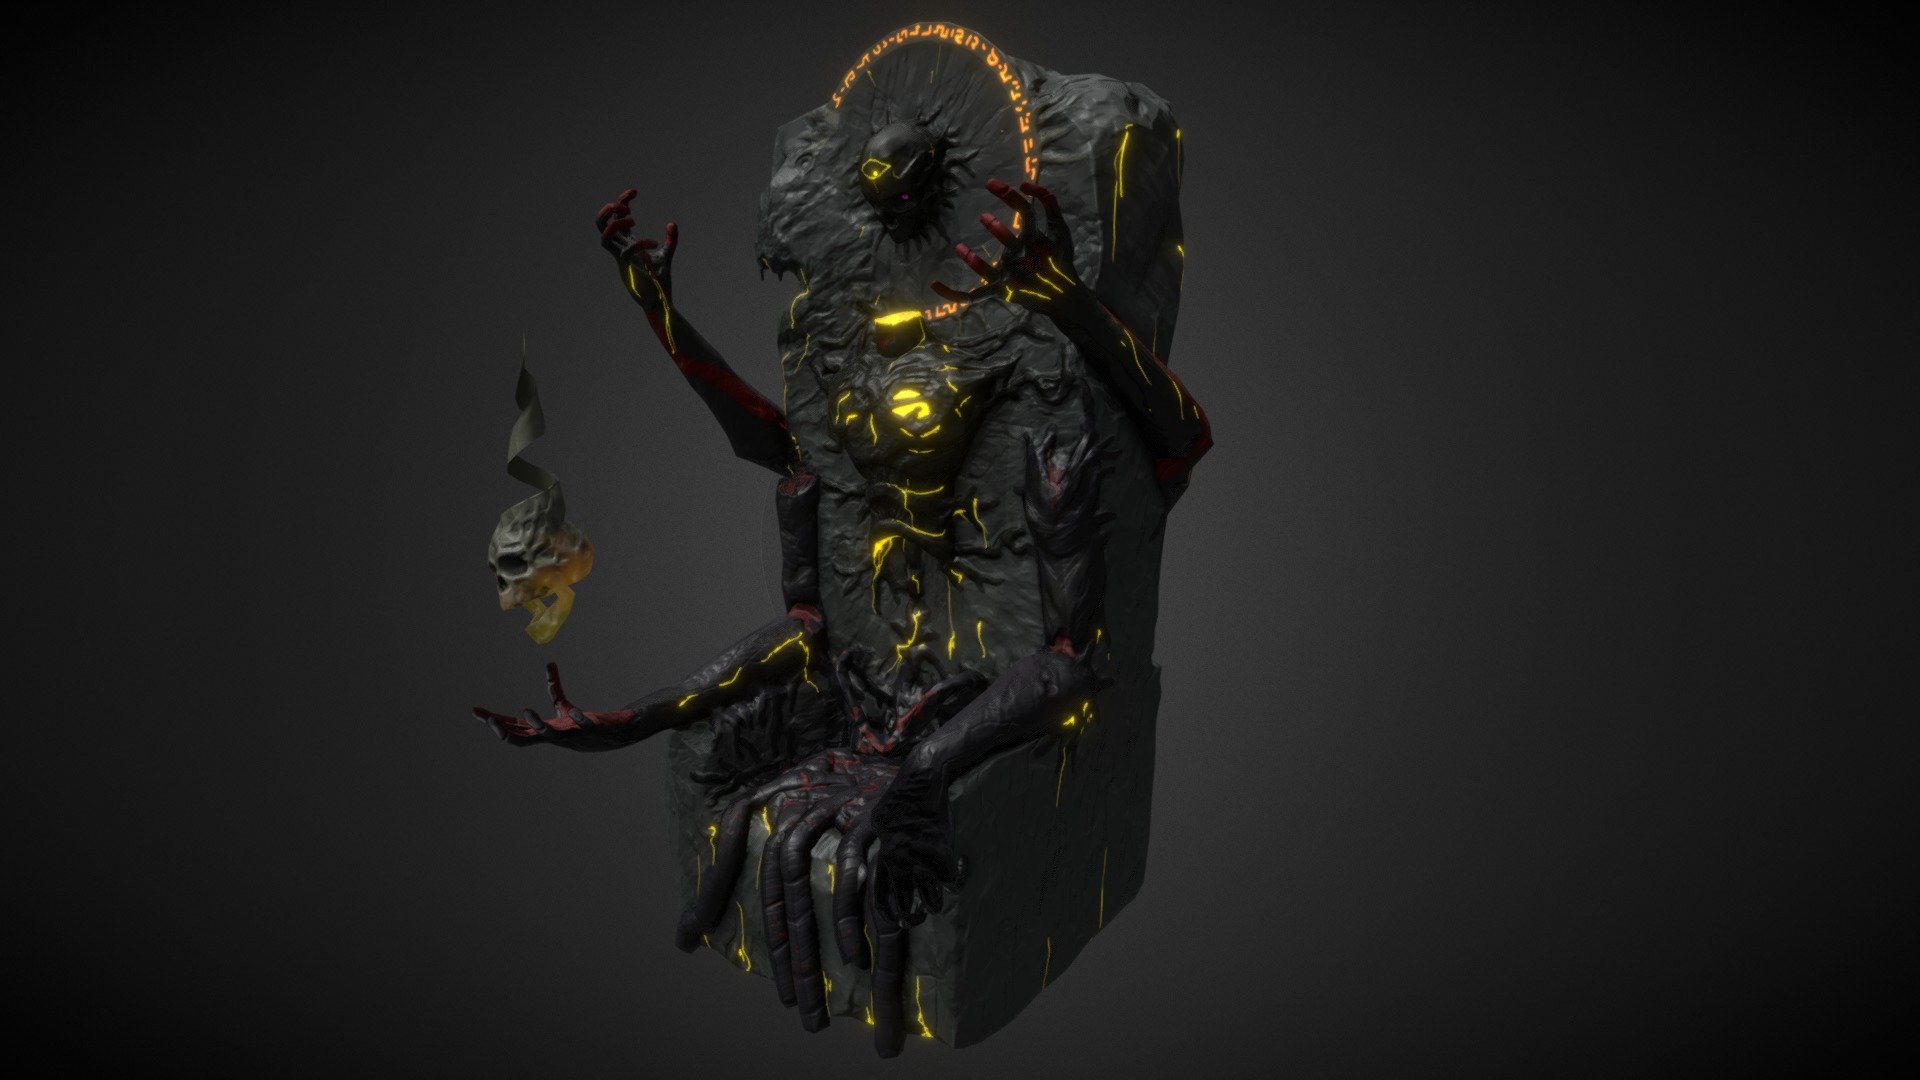 This is a model i worked on after playing dark souls and wanted to try out some artwork like the game's artstyle.
the reference taken from is in the link below :

https://www.artstation.com/artwork/X6qEy - The Fallen One - 3D model by Siddharth Chari (@darthsidd1995) 3d model